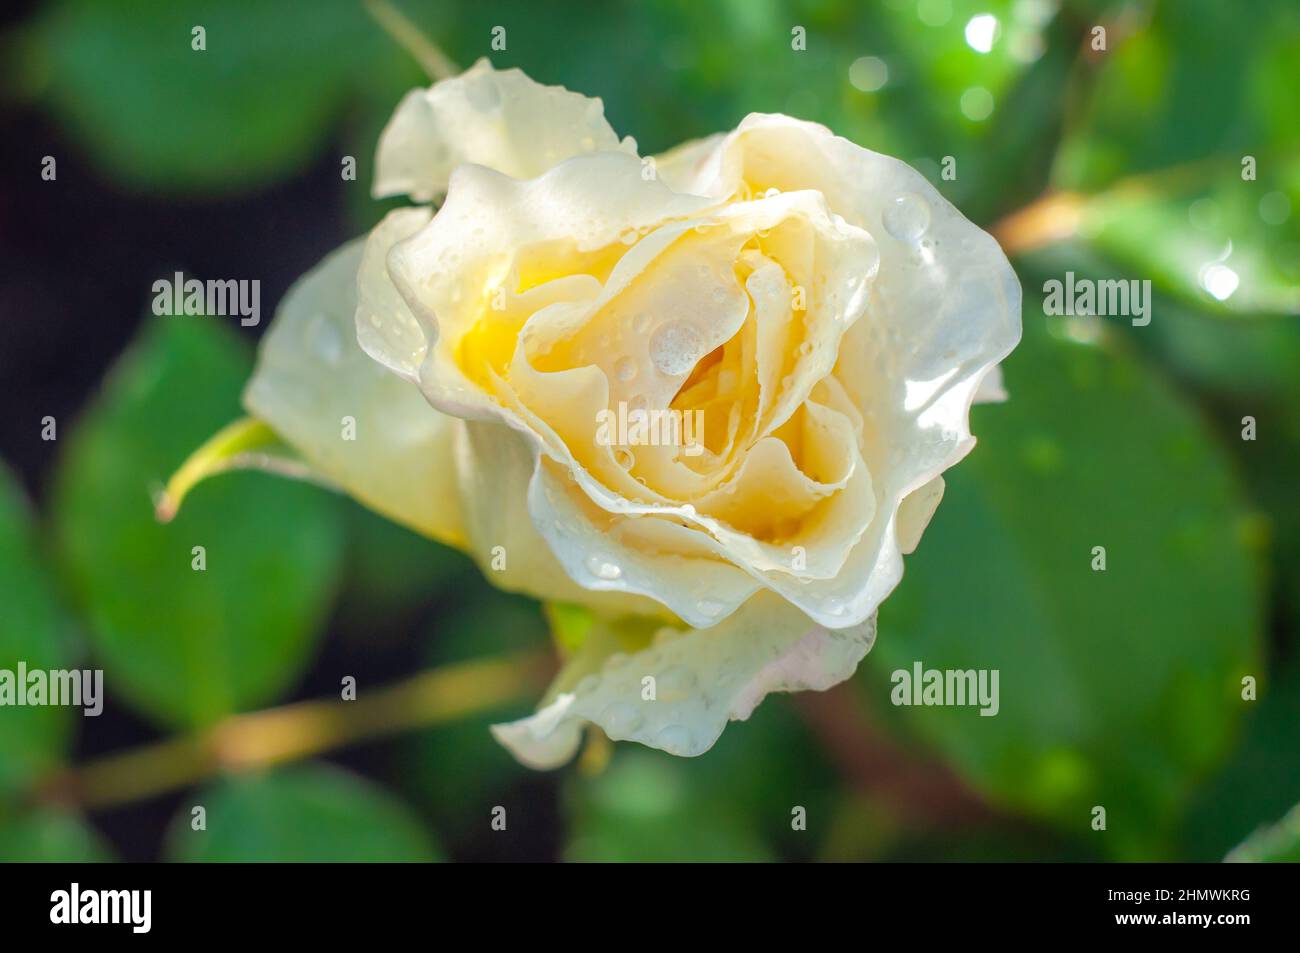 Opened white rose bud with drops after rain. White rose with yellow glow, flower on green blurred background, selective focus. Stock Photo